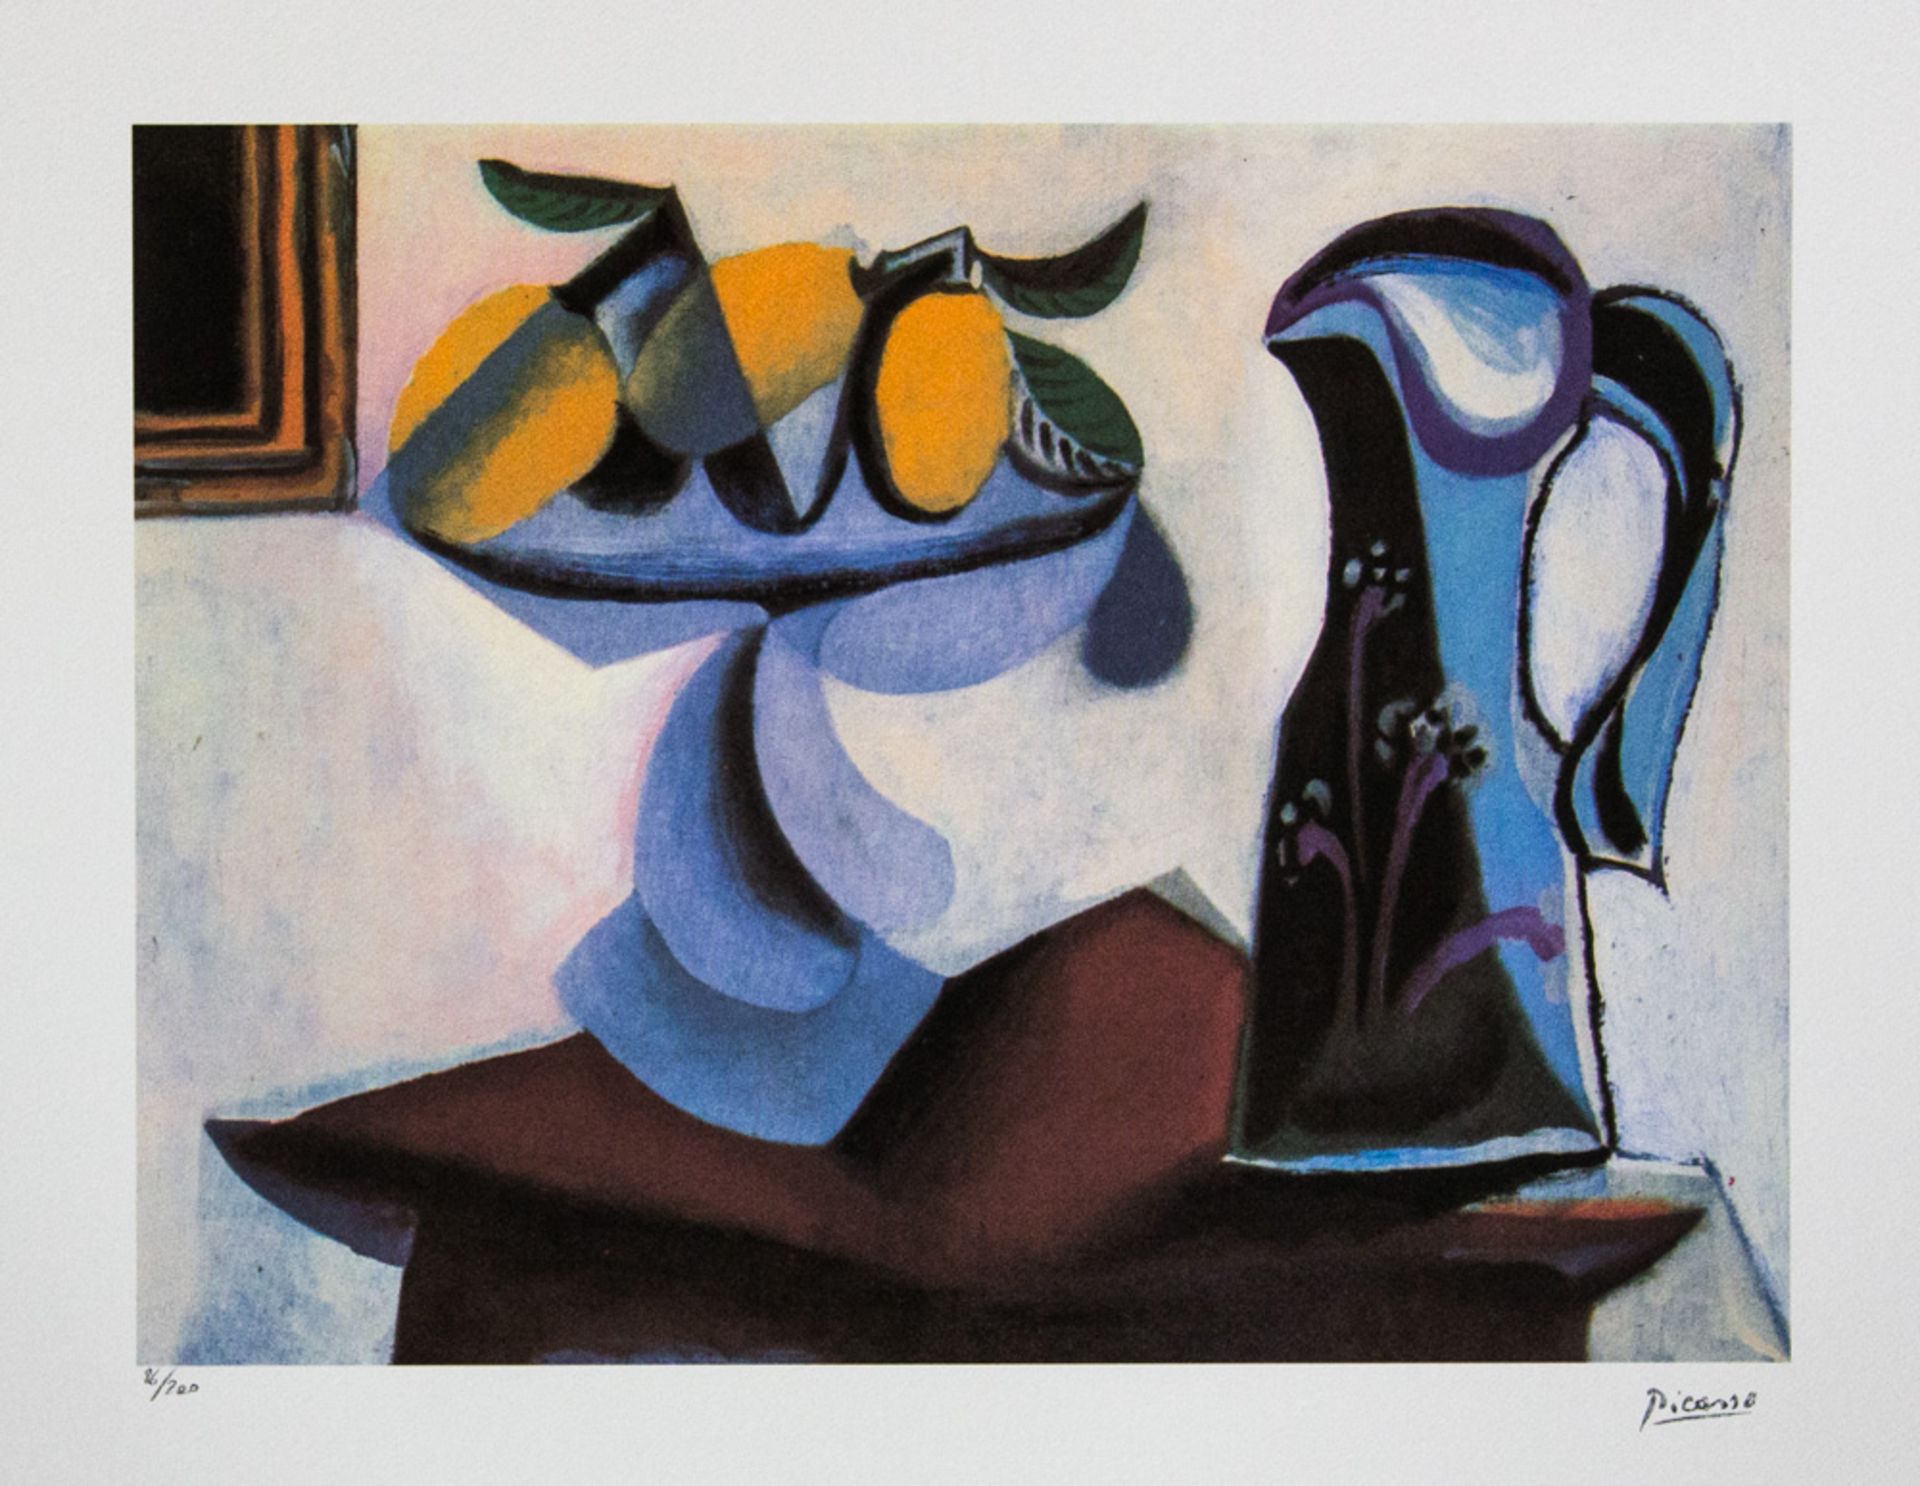 Pablo Picasso 'Still Life with Lemon and a Jug'